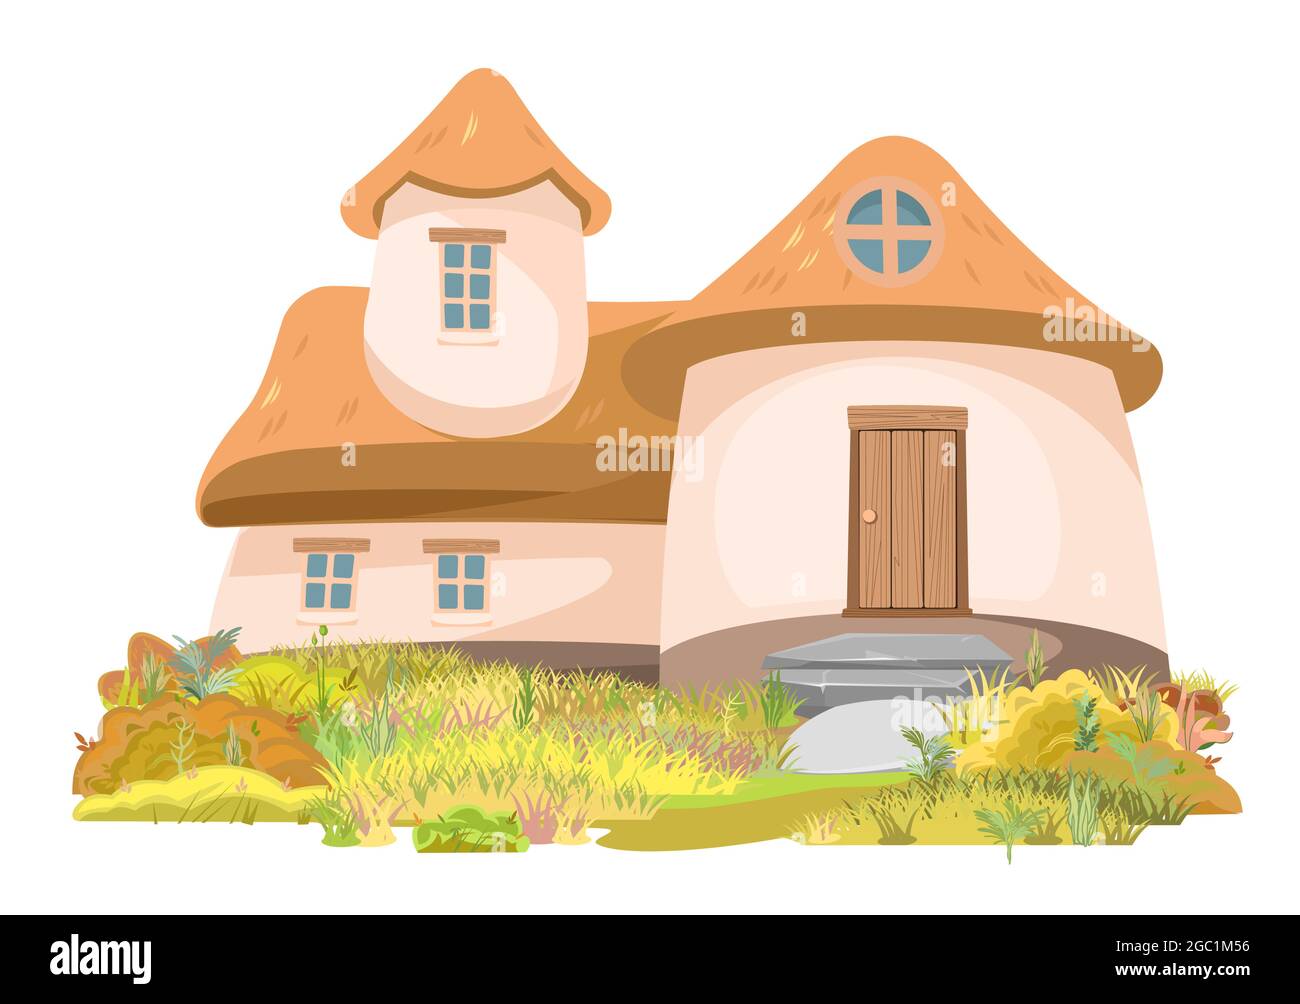 Straw hut illustration Cut Out Stock Images & Pictures - Alamy